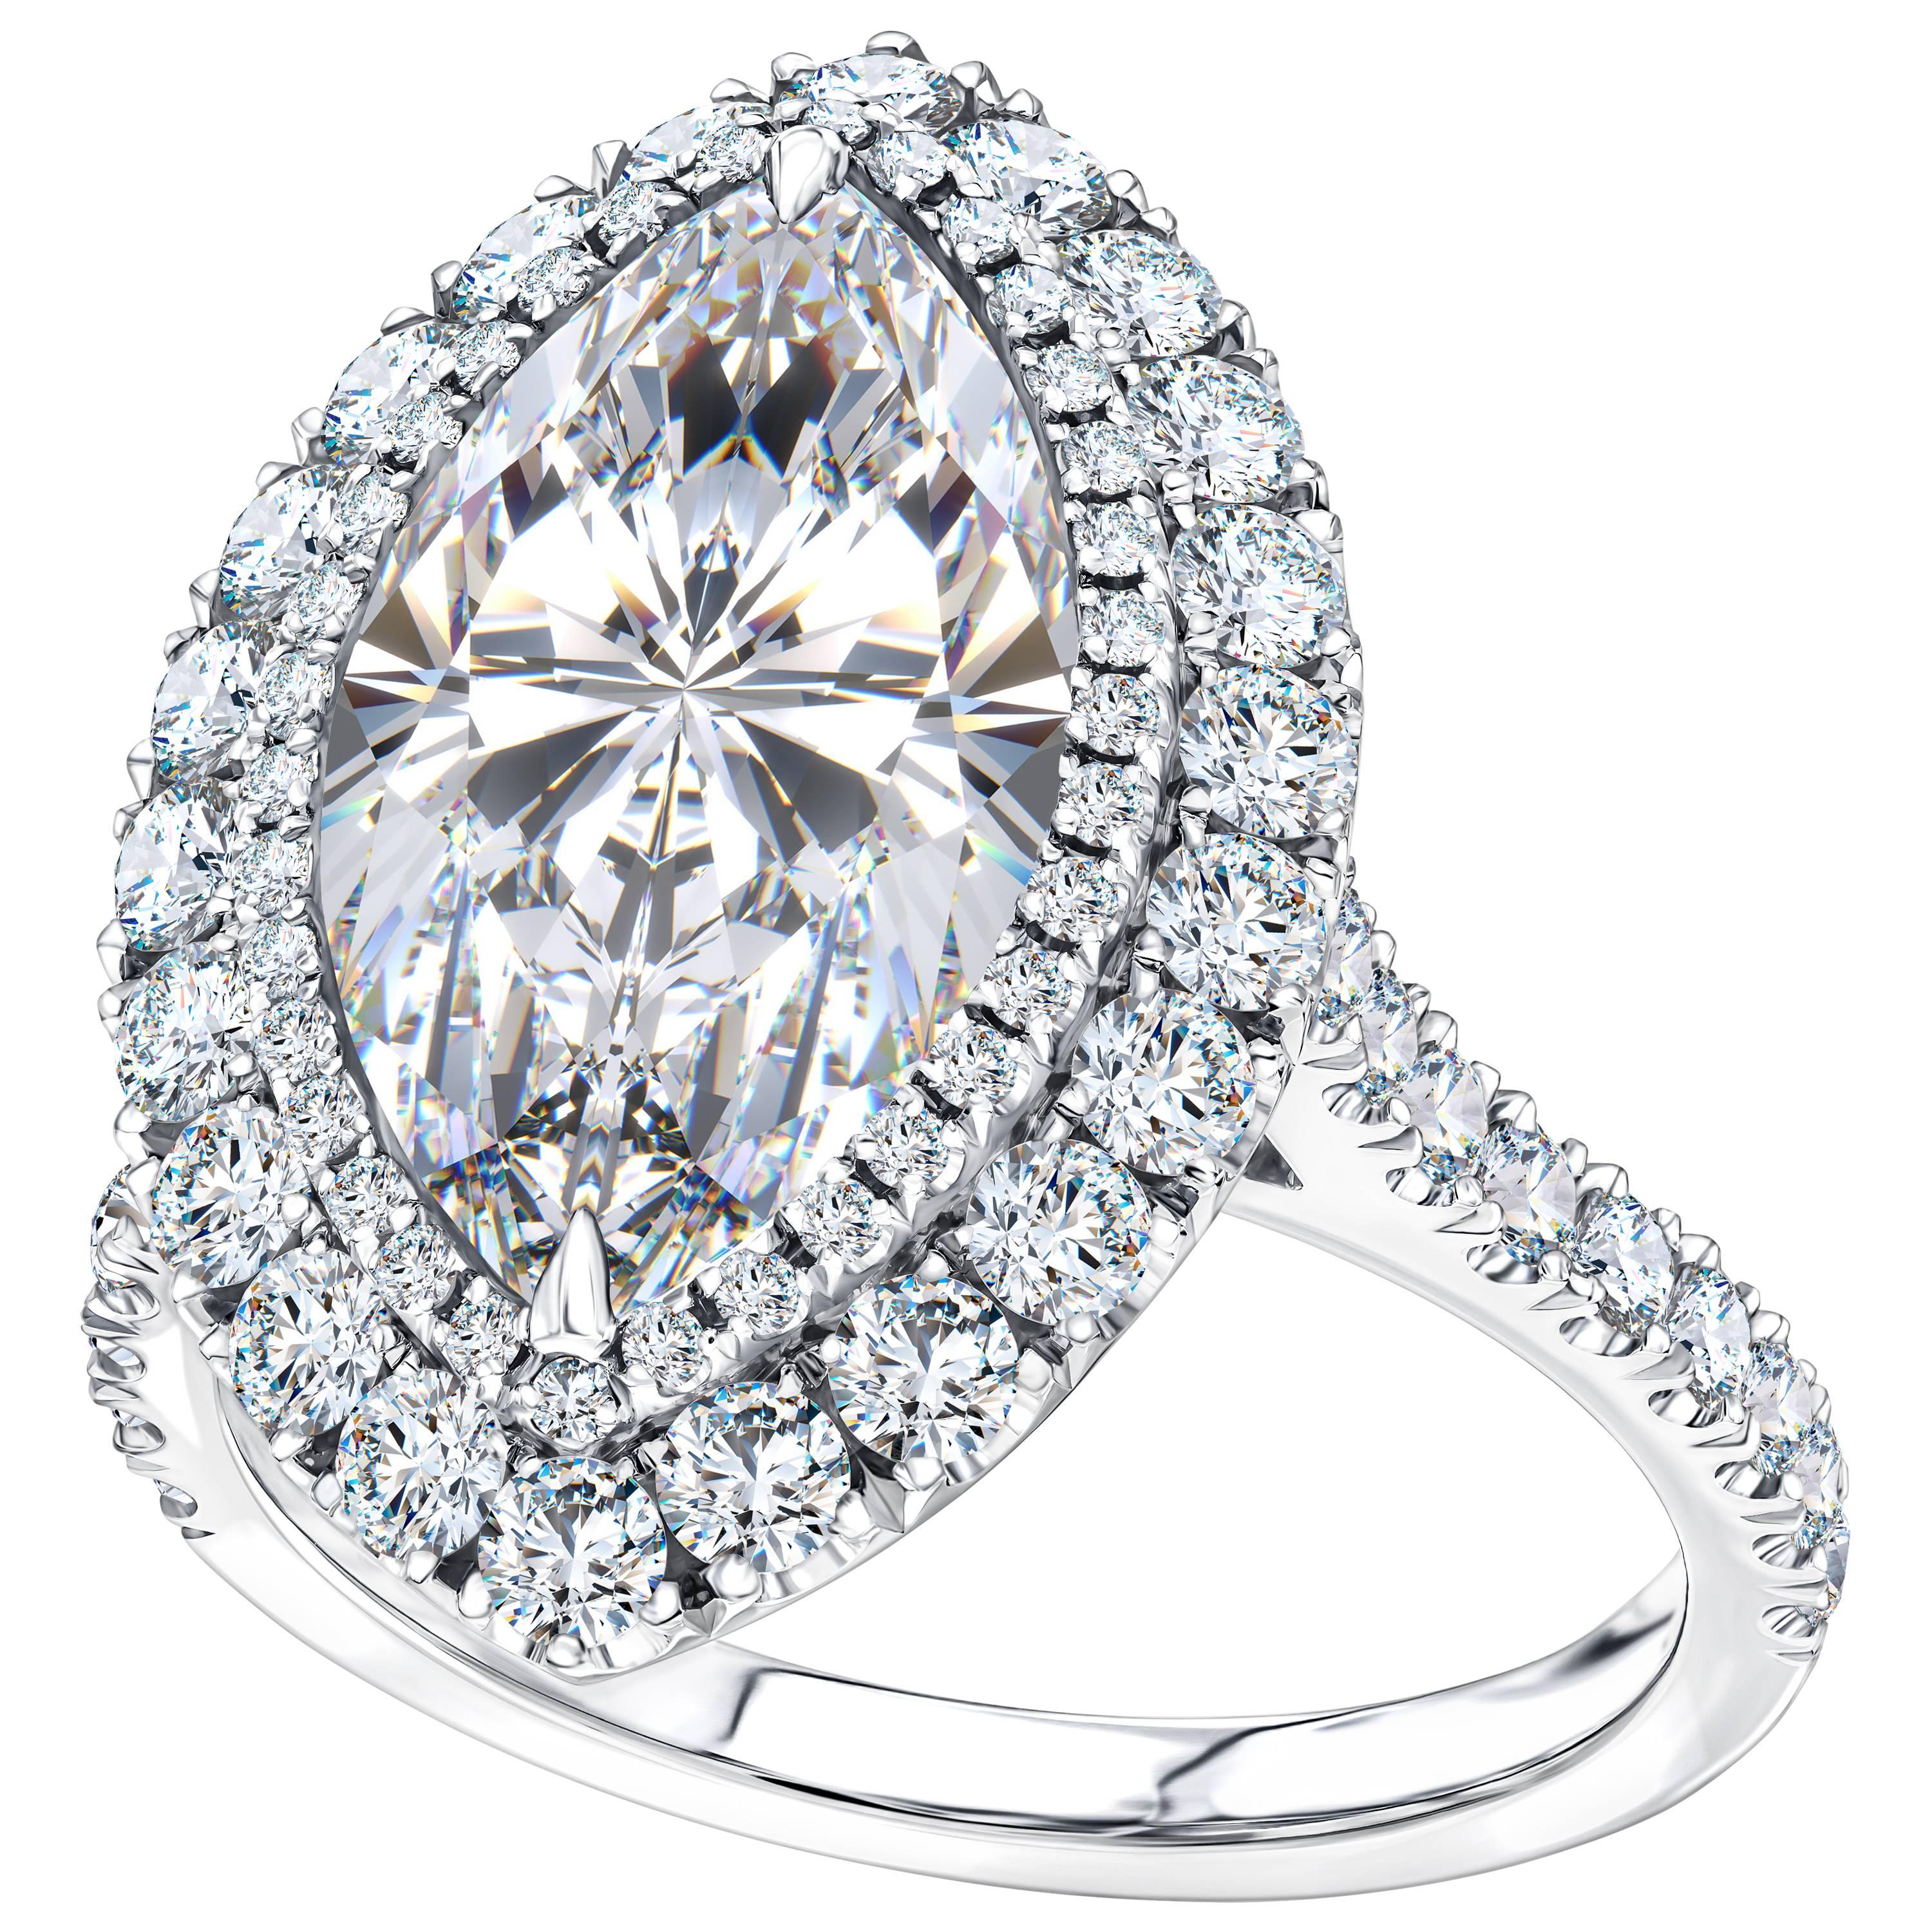 This Spectacular GIA Certified 5.01 Carat Marquise Diamond Engagement Ring Color F Clarity SI2 features a double halo of 1.31 Carat of White Round Brilliant Diamonds Color H Clarity SI1 set in Platinum this stunning ring sparkles like none other. UK